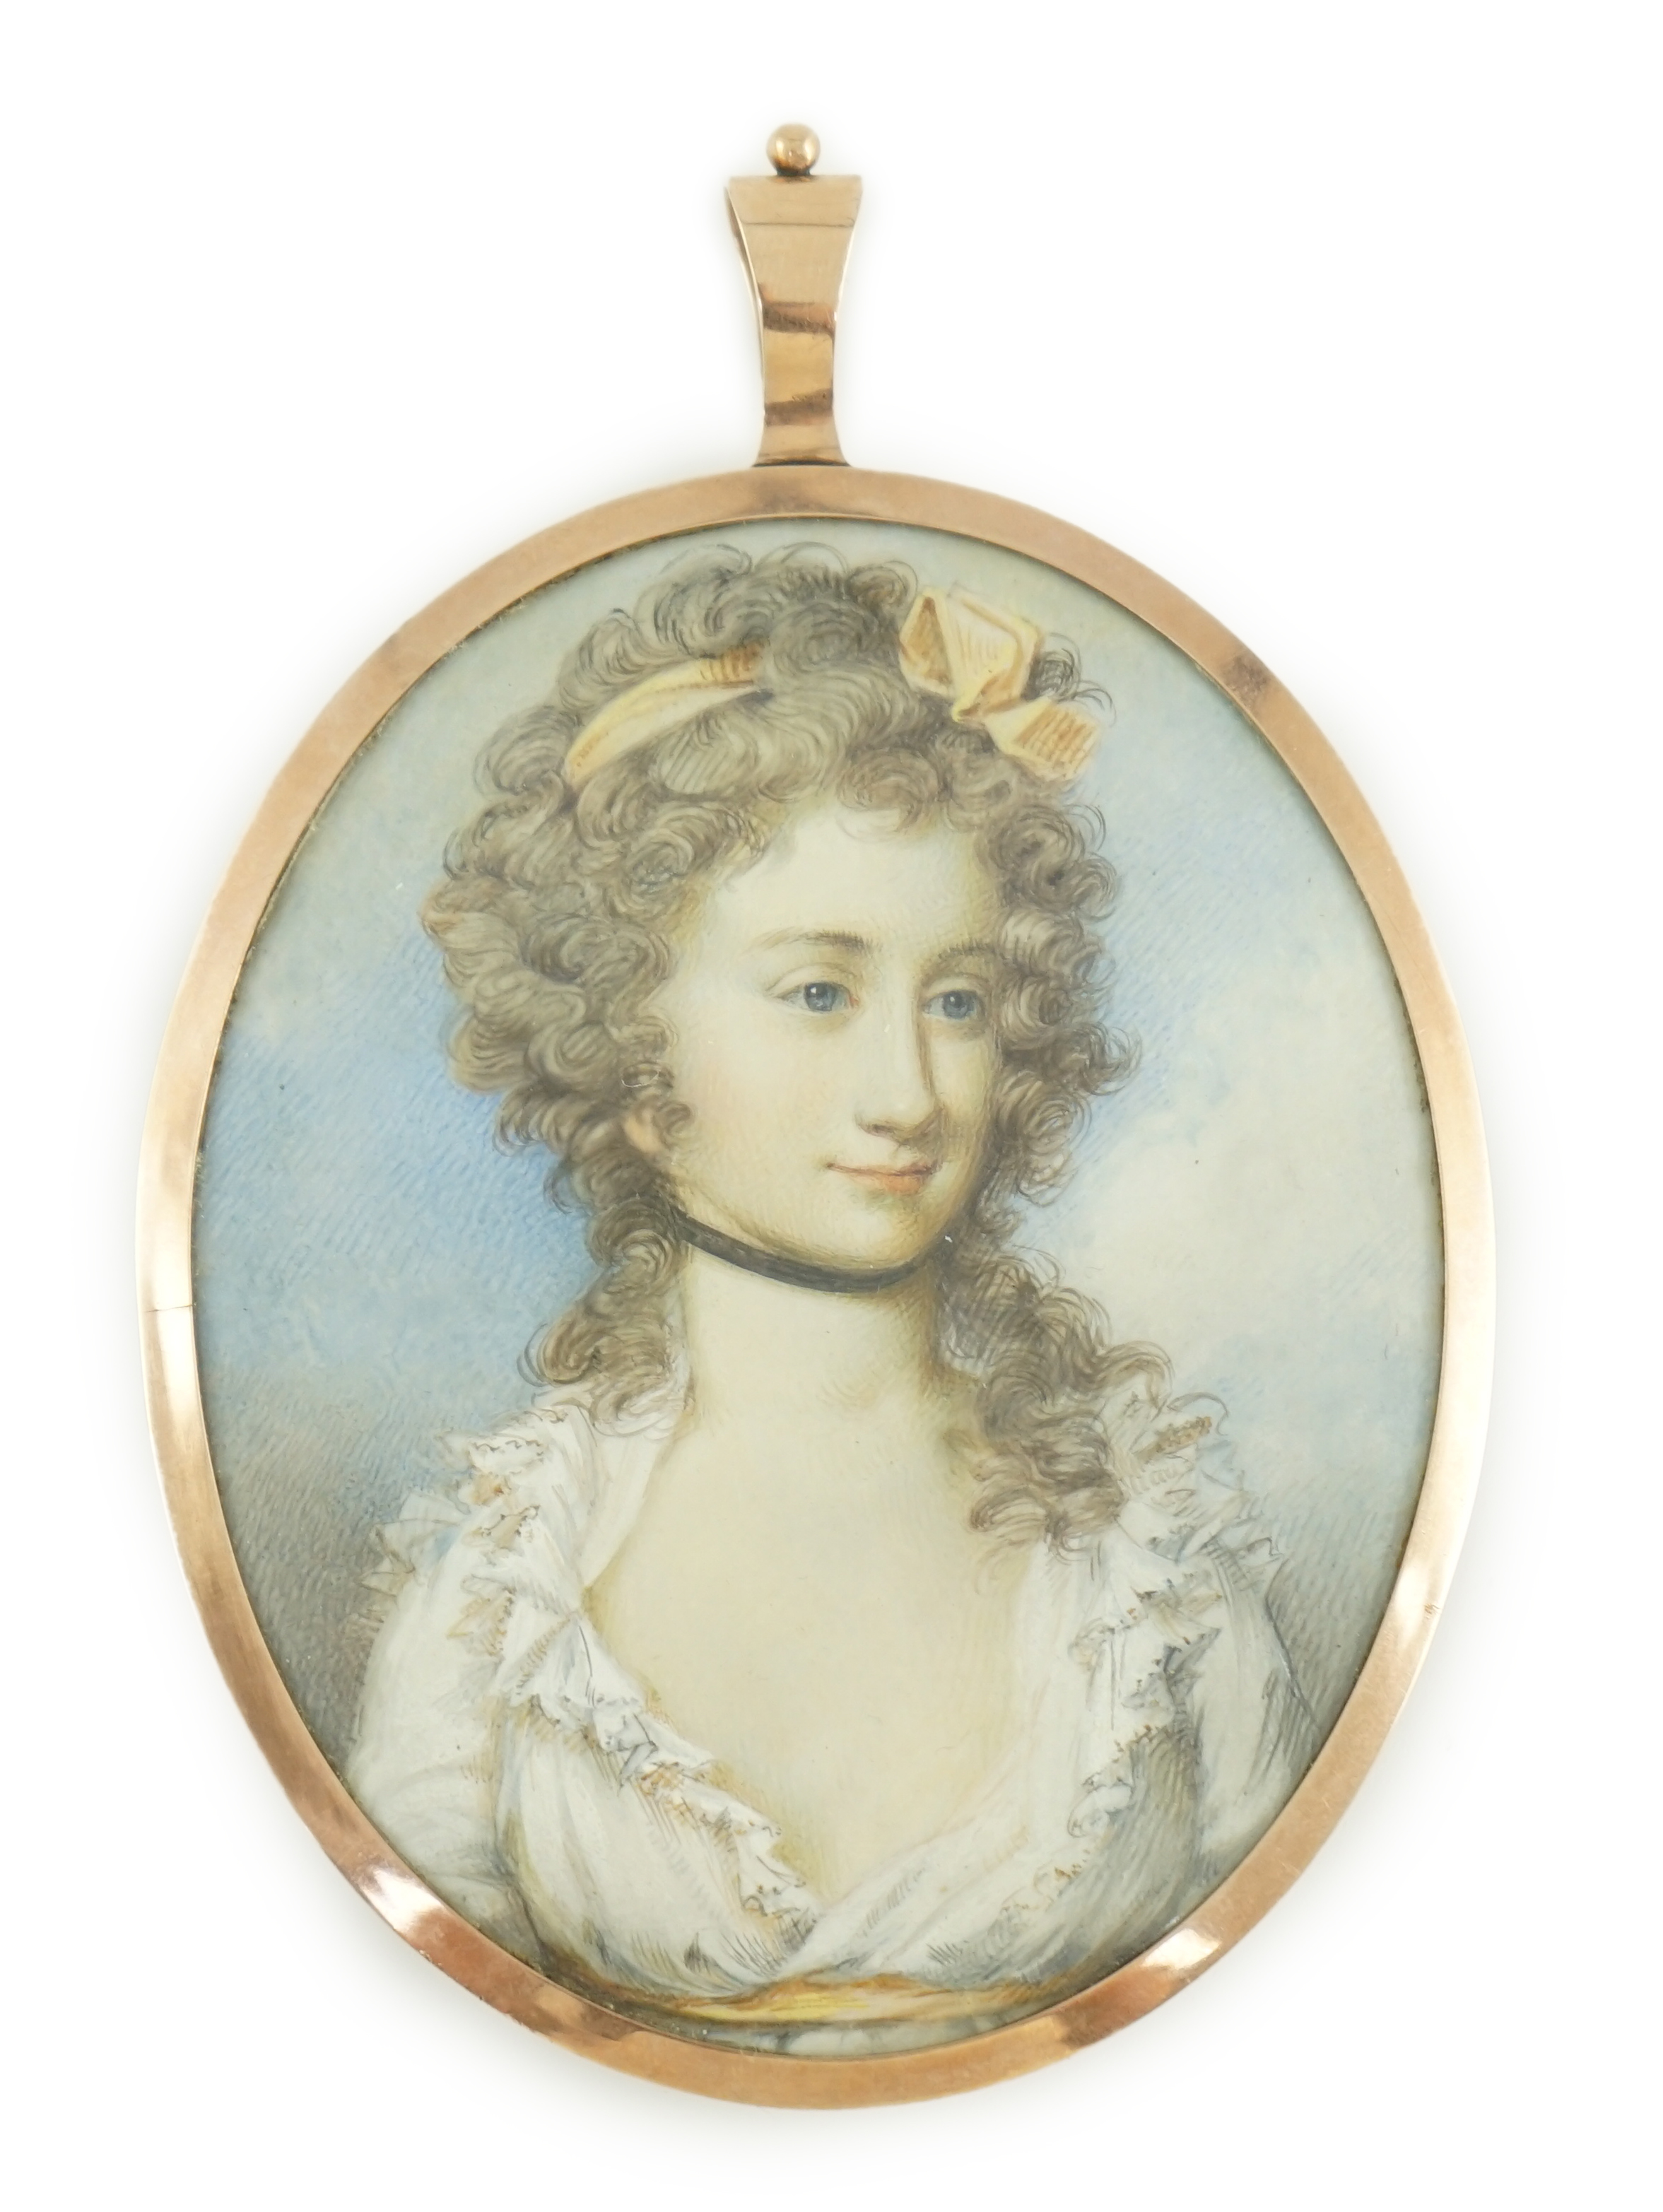 Thomas Hargreaves (1775-1846), Portrait miniature of a lady, watercolour on ivory, 7.7 x 6.2cm. CITES Submission reference V4Z8QFSY